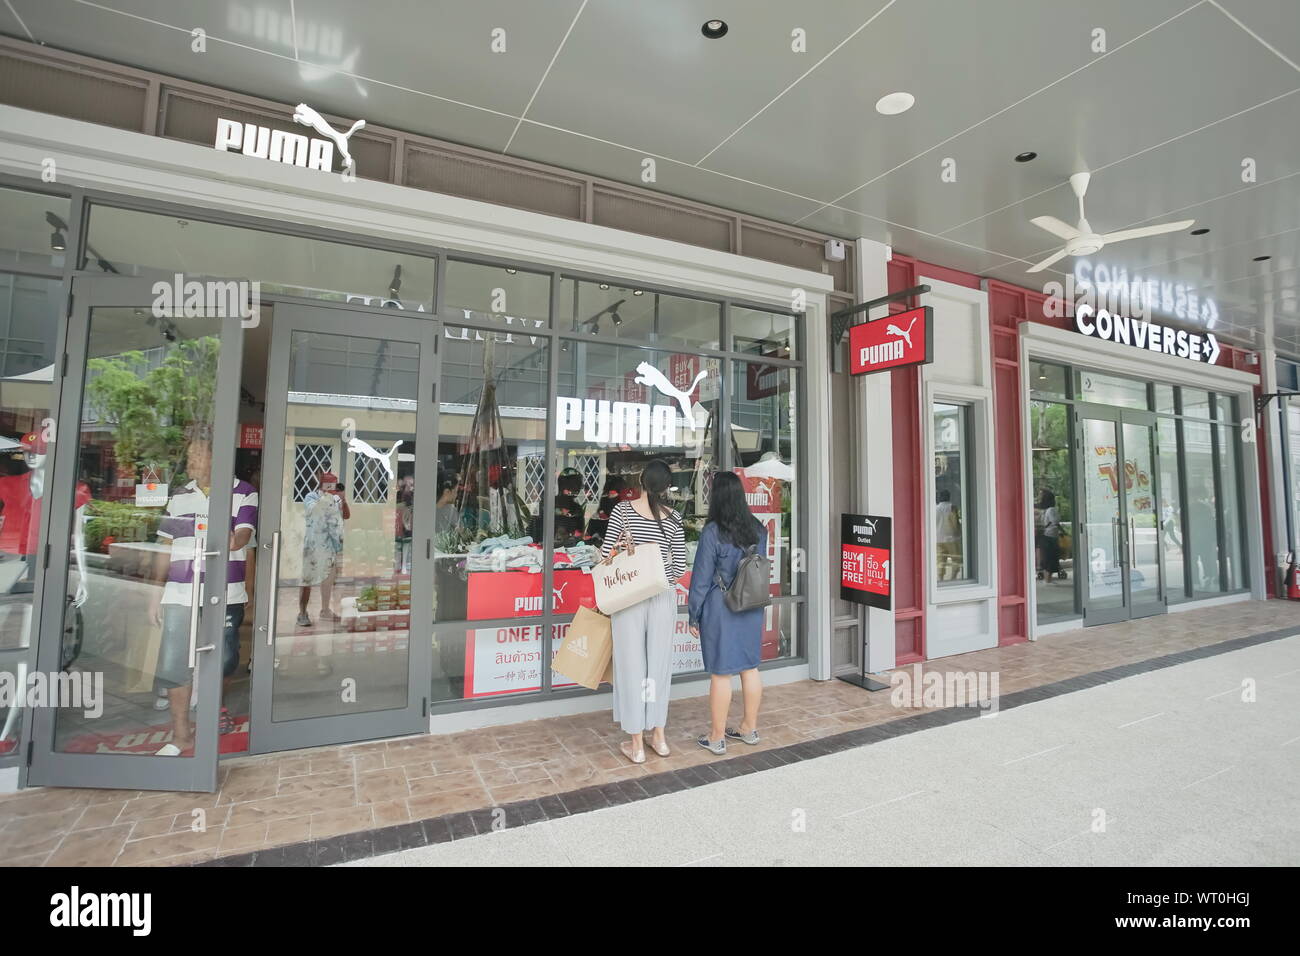 Samut Prakan, Thailand - September 06, 2019: Puma and Converse Store in the new one shopping mall named Central Village. Stock Photo